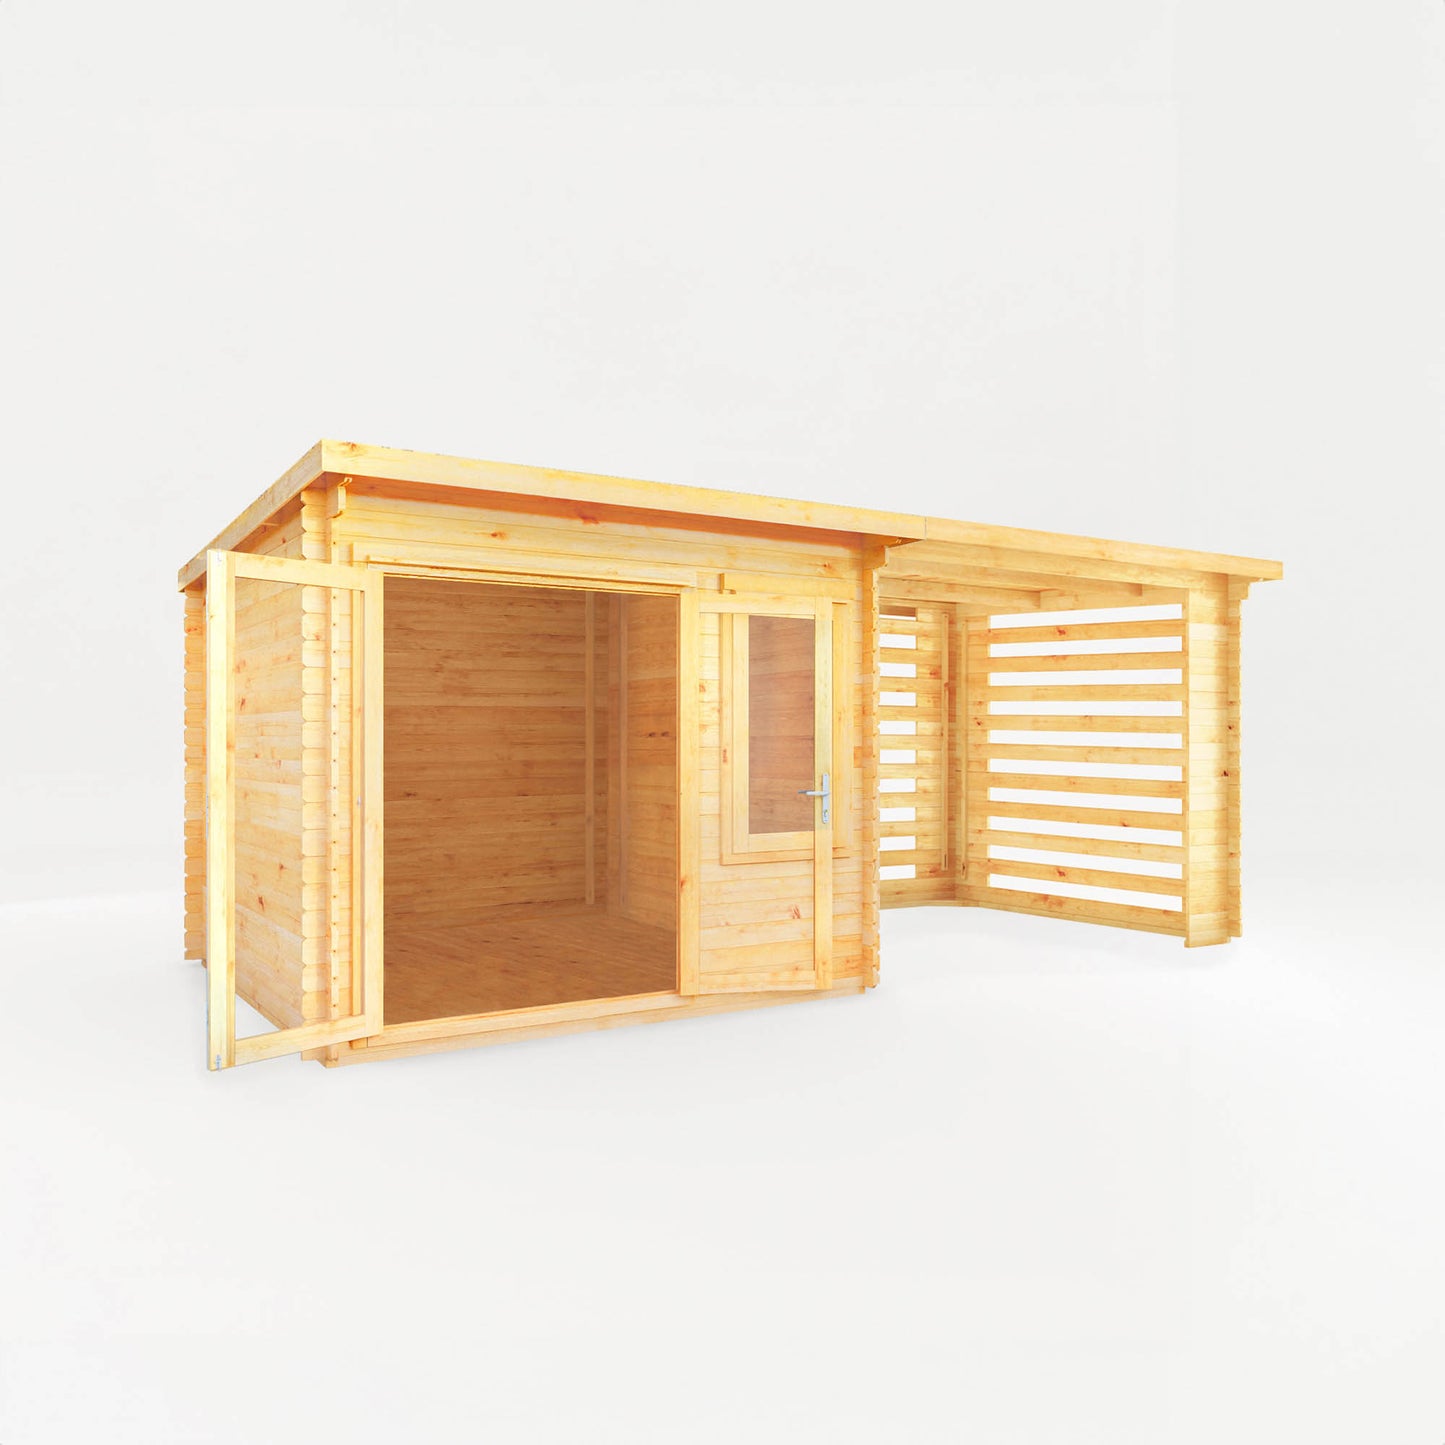 The 6m x 3m Cuckoo Pent Log Cabin with Slatted Area